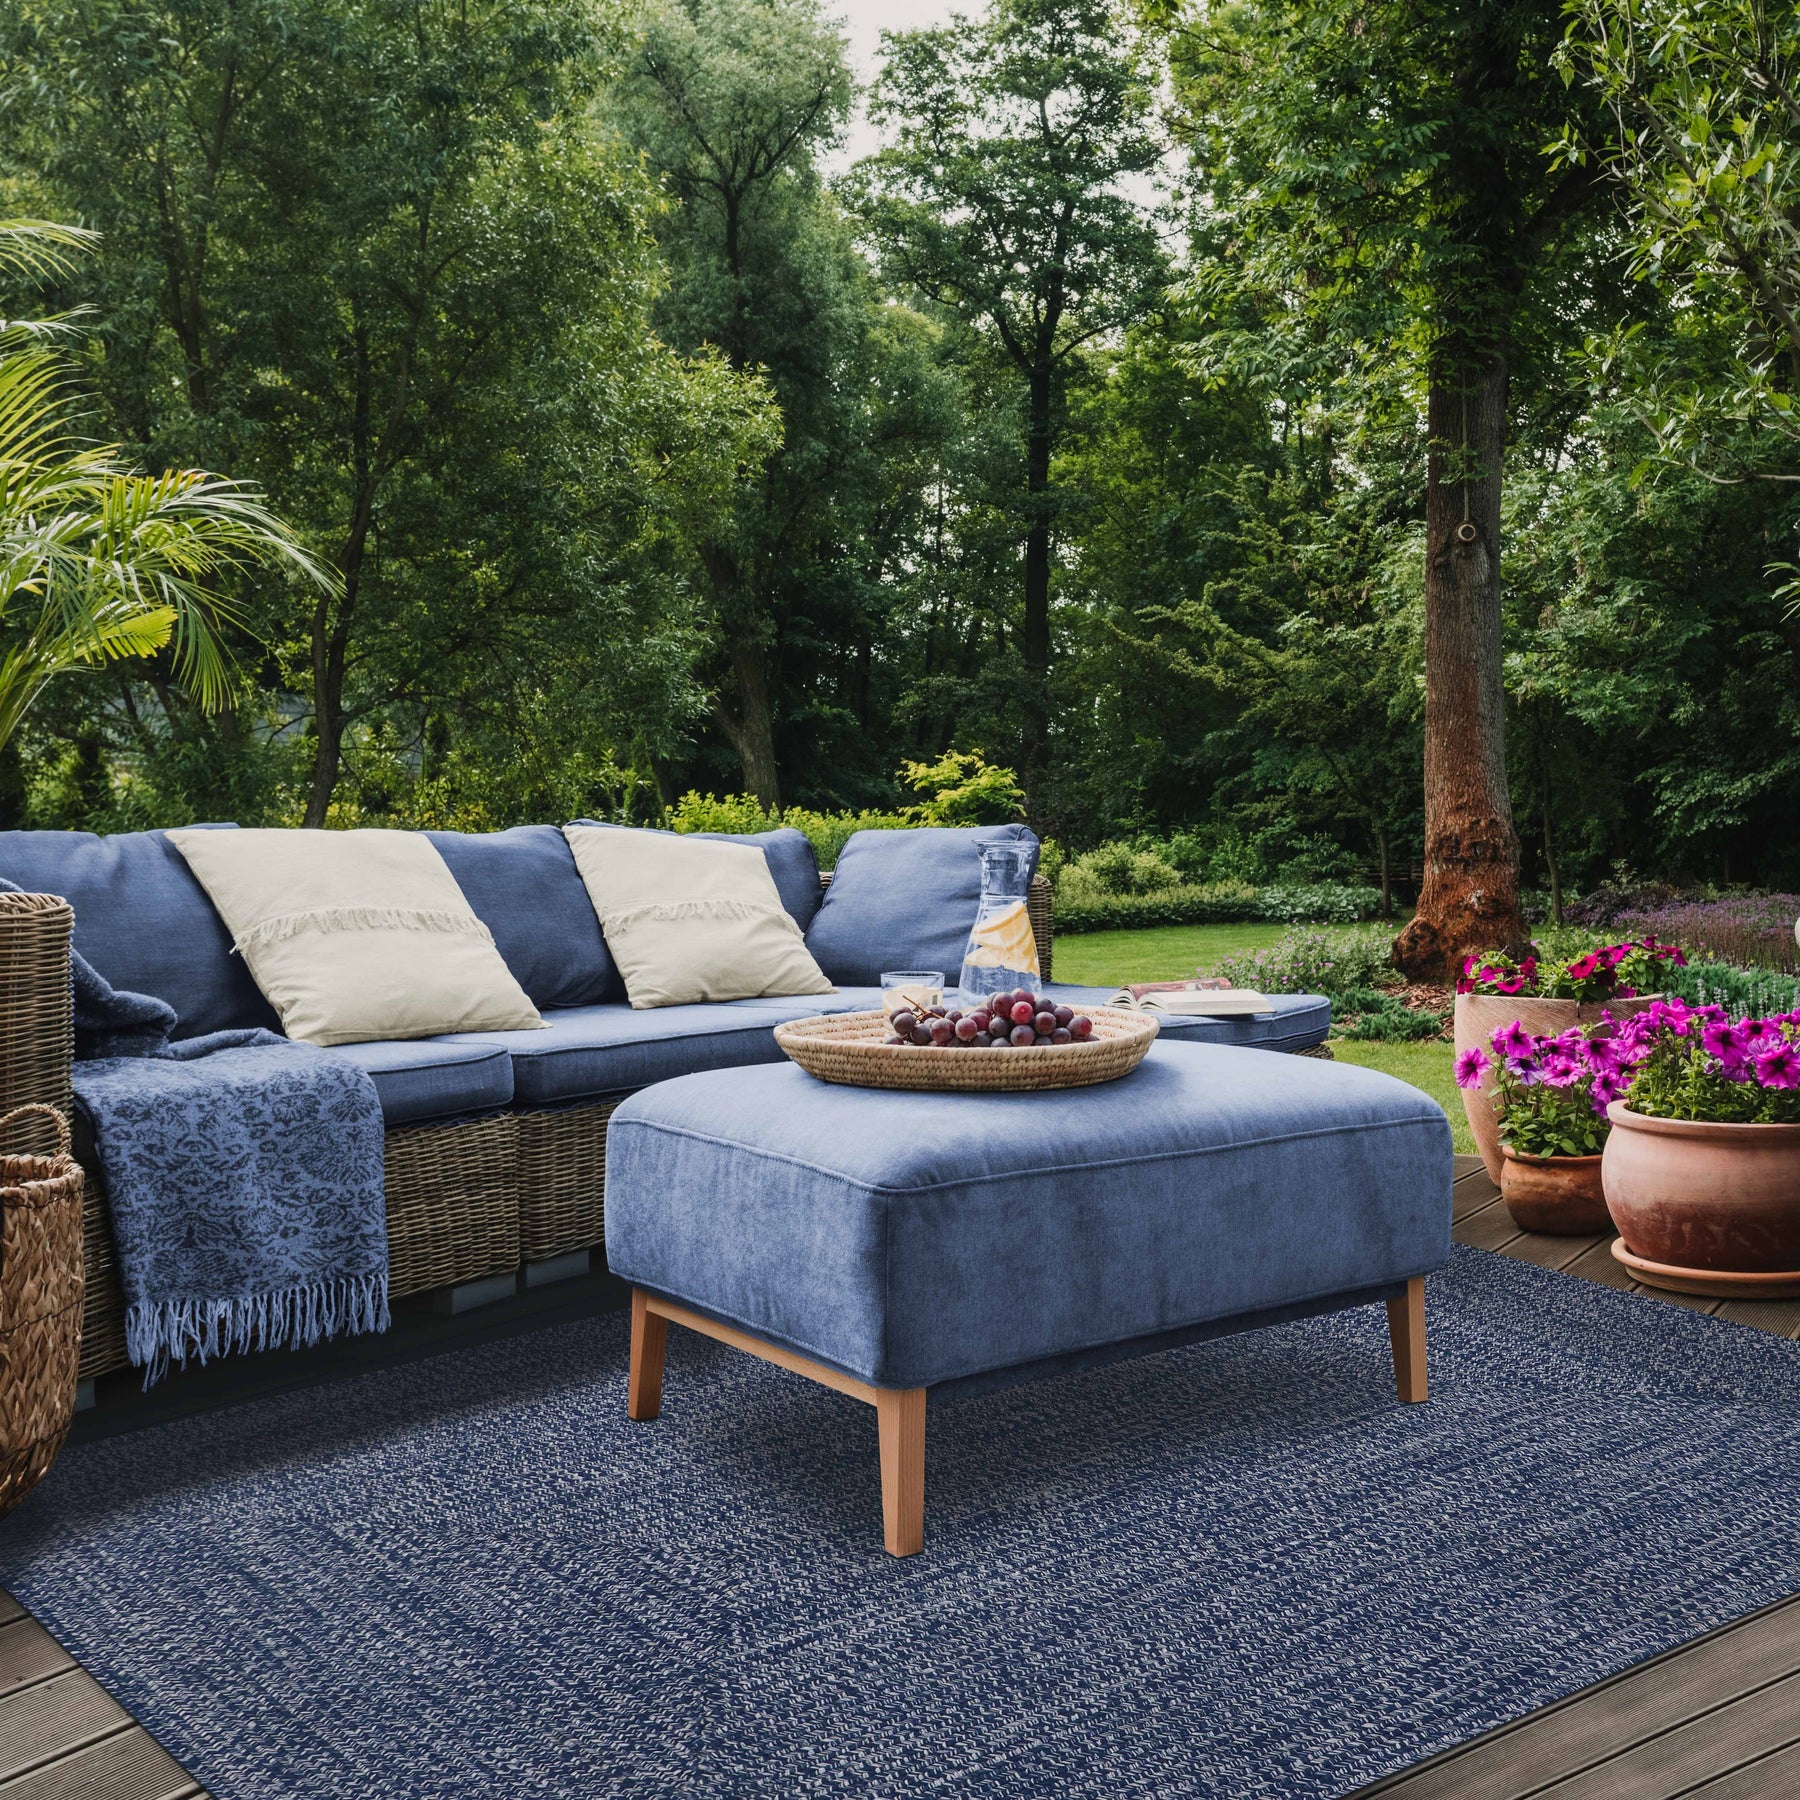 Superior Bohemian Multi-Toned Braided Patterned Indoor Outdoor Area Rug - Denim Blue-White